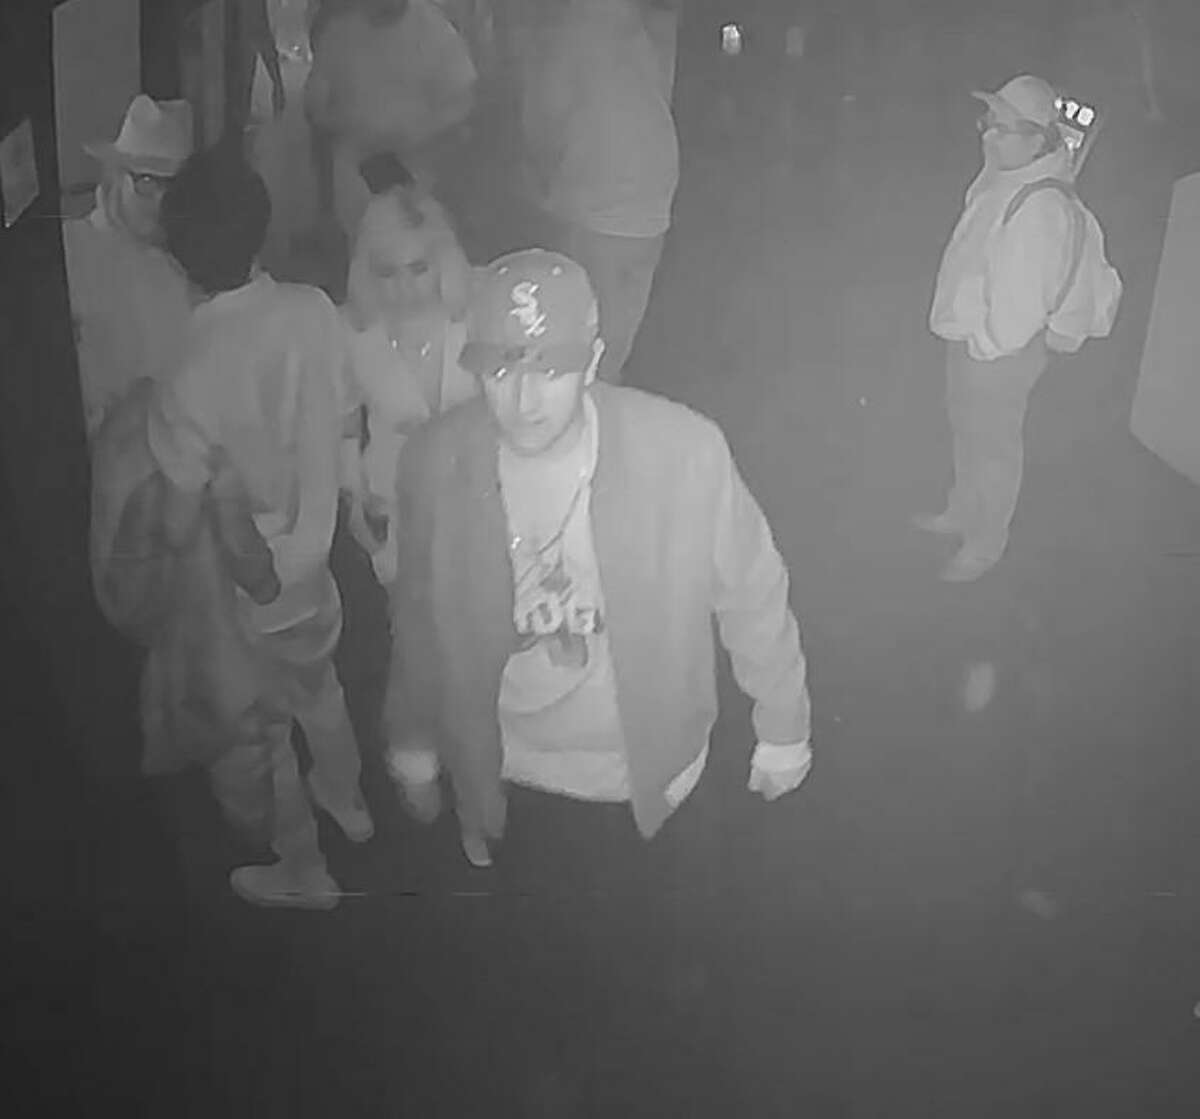 SFPD released a surveillance photo of one of the suspects sought in a shooting outside a San Francisco nightclub.